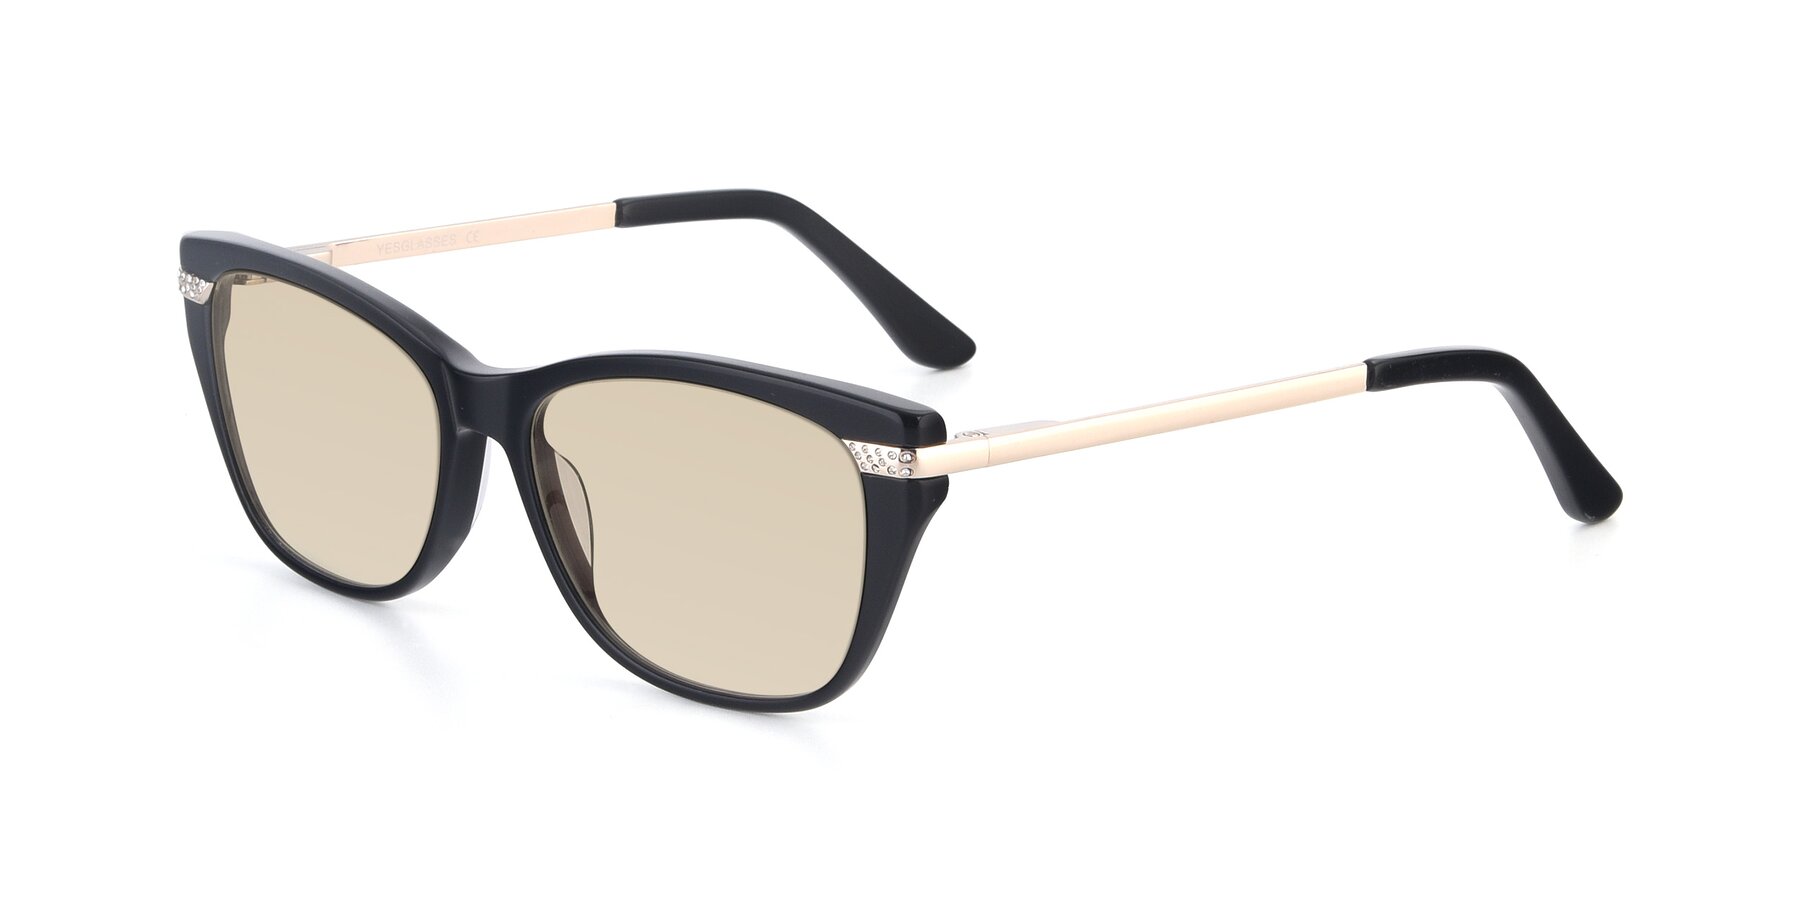 Angle of 17515 in Black with Light Brown Tinted Lenses